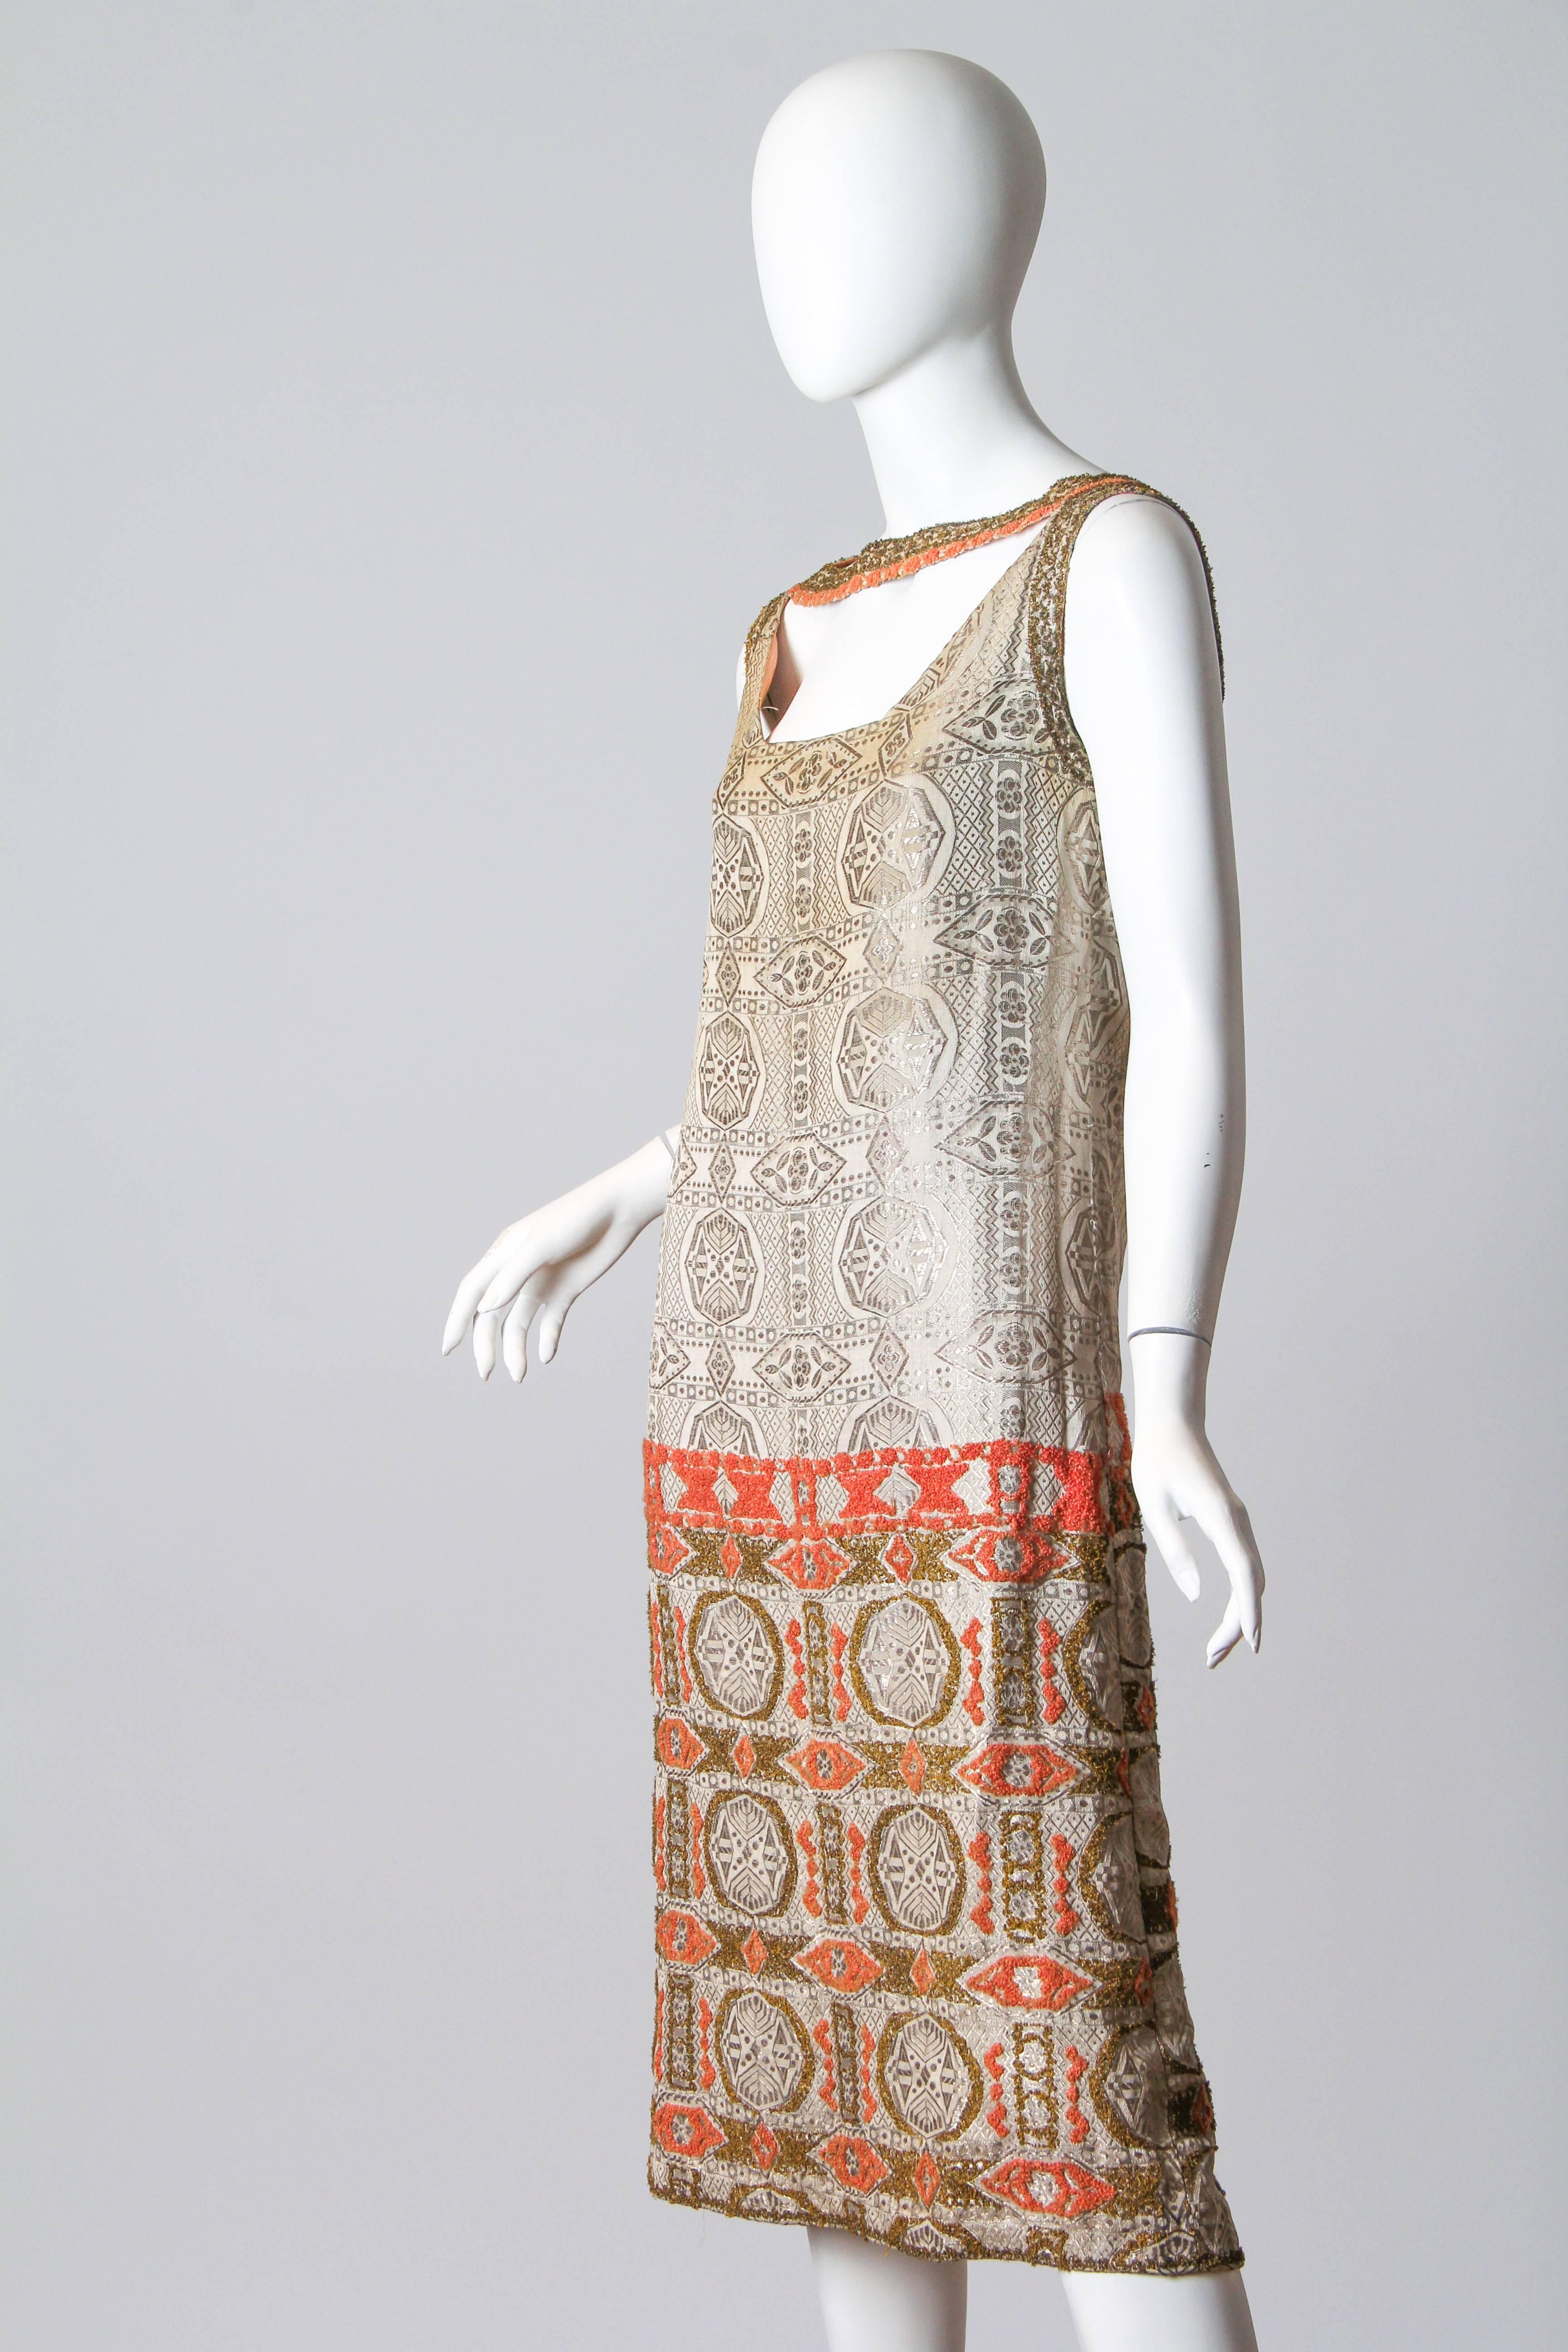 An interesting artistic and yet risqué dress from the flapper age. Purchased in Paris we couldn't resist the individuality of this very high quality dress. The silver lamé jacquard of this dress has been hand embroidered with metal and silk